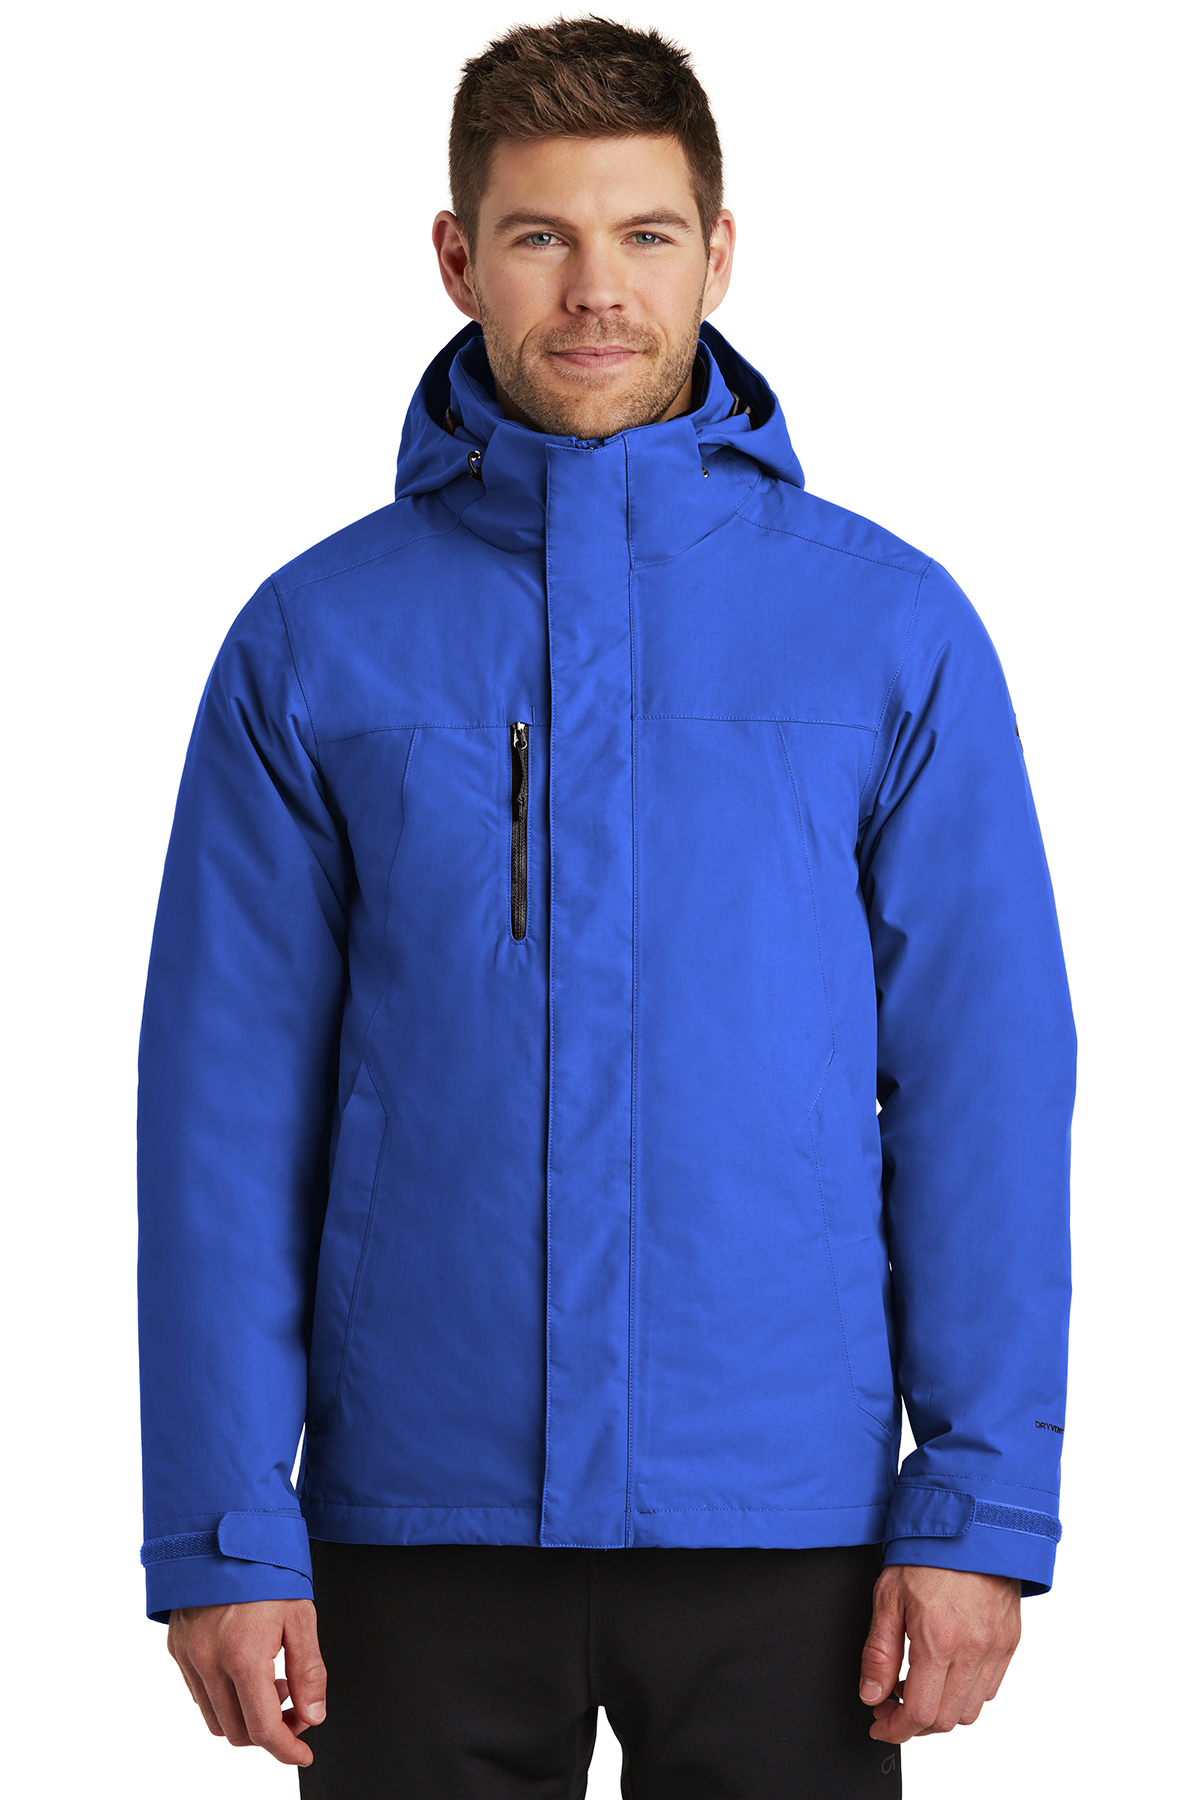 NF0A3VHR The North Face ® Traverse Triclimate ® 3-in-1 Jacket